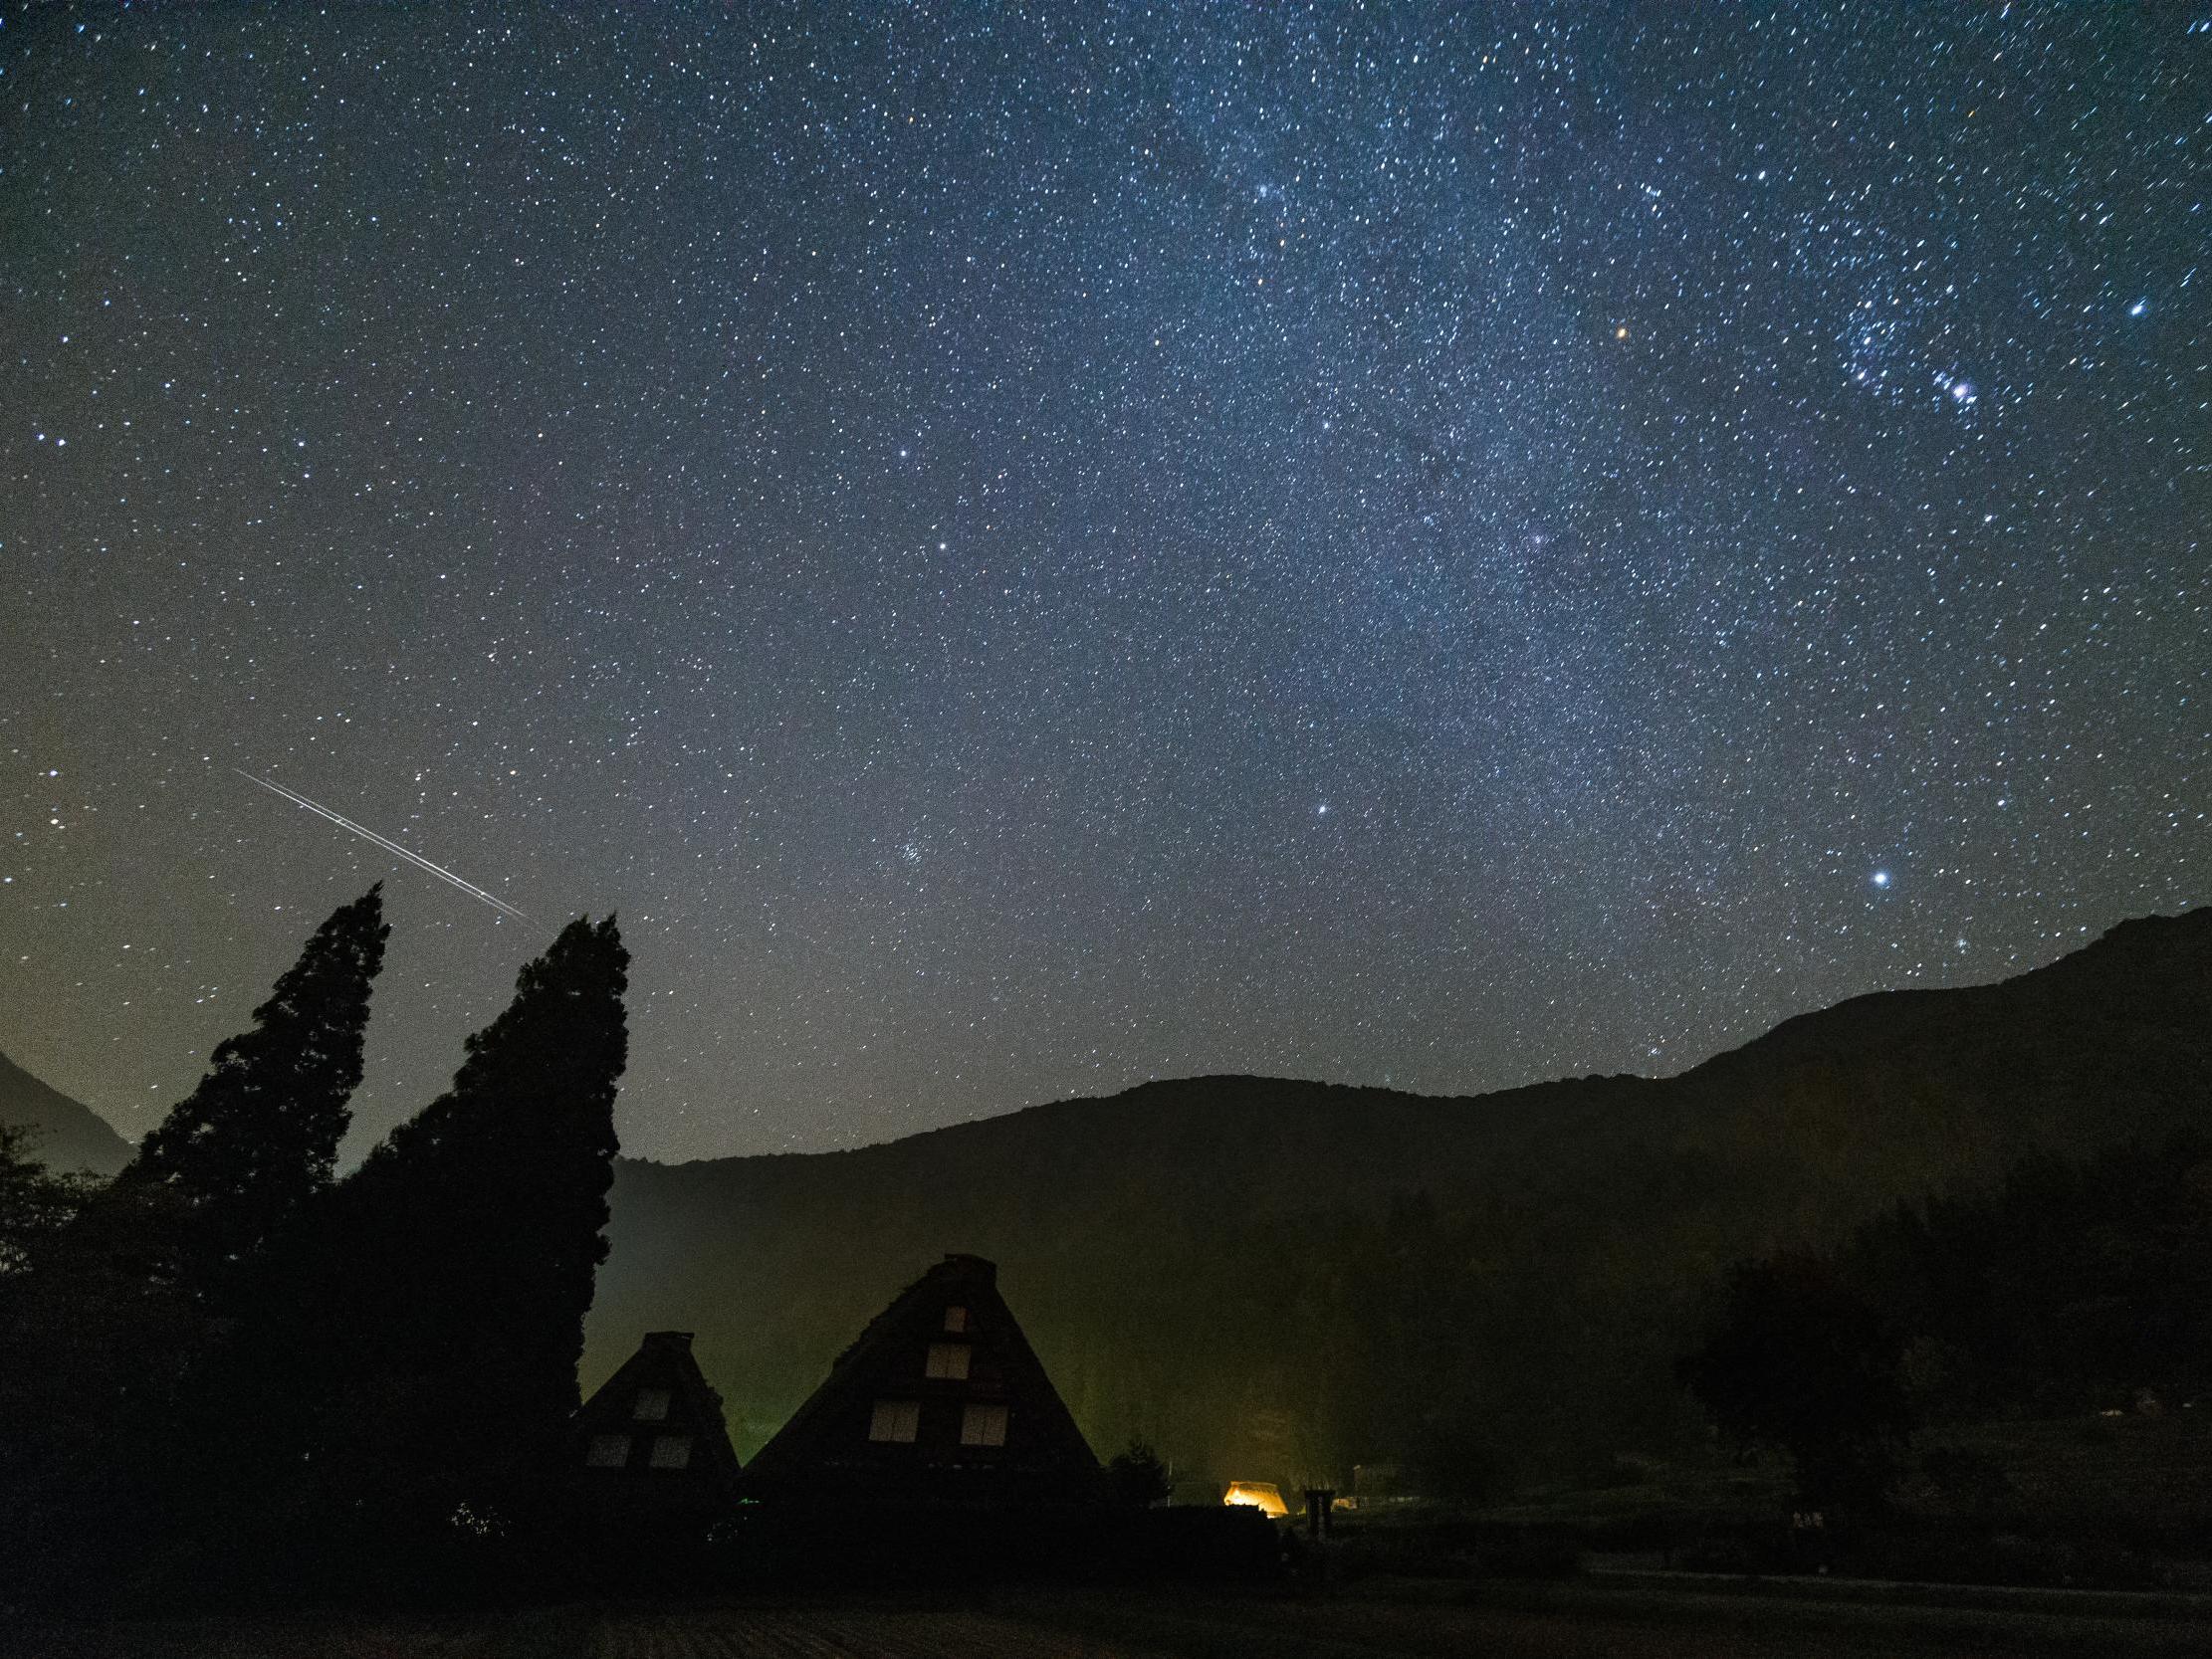 The display is caused by meteoroids colliding with Earth’s atmosphere at 148,000mph